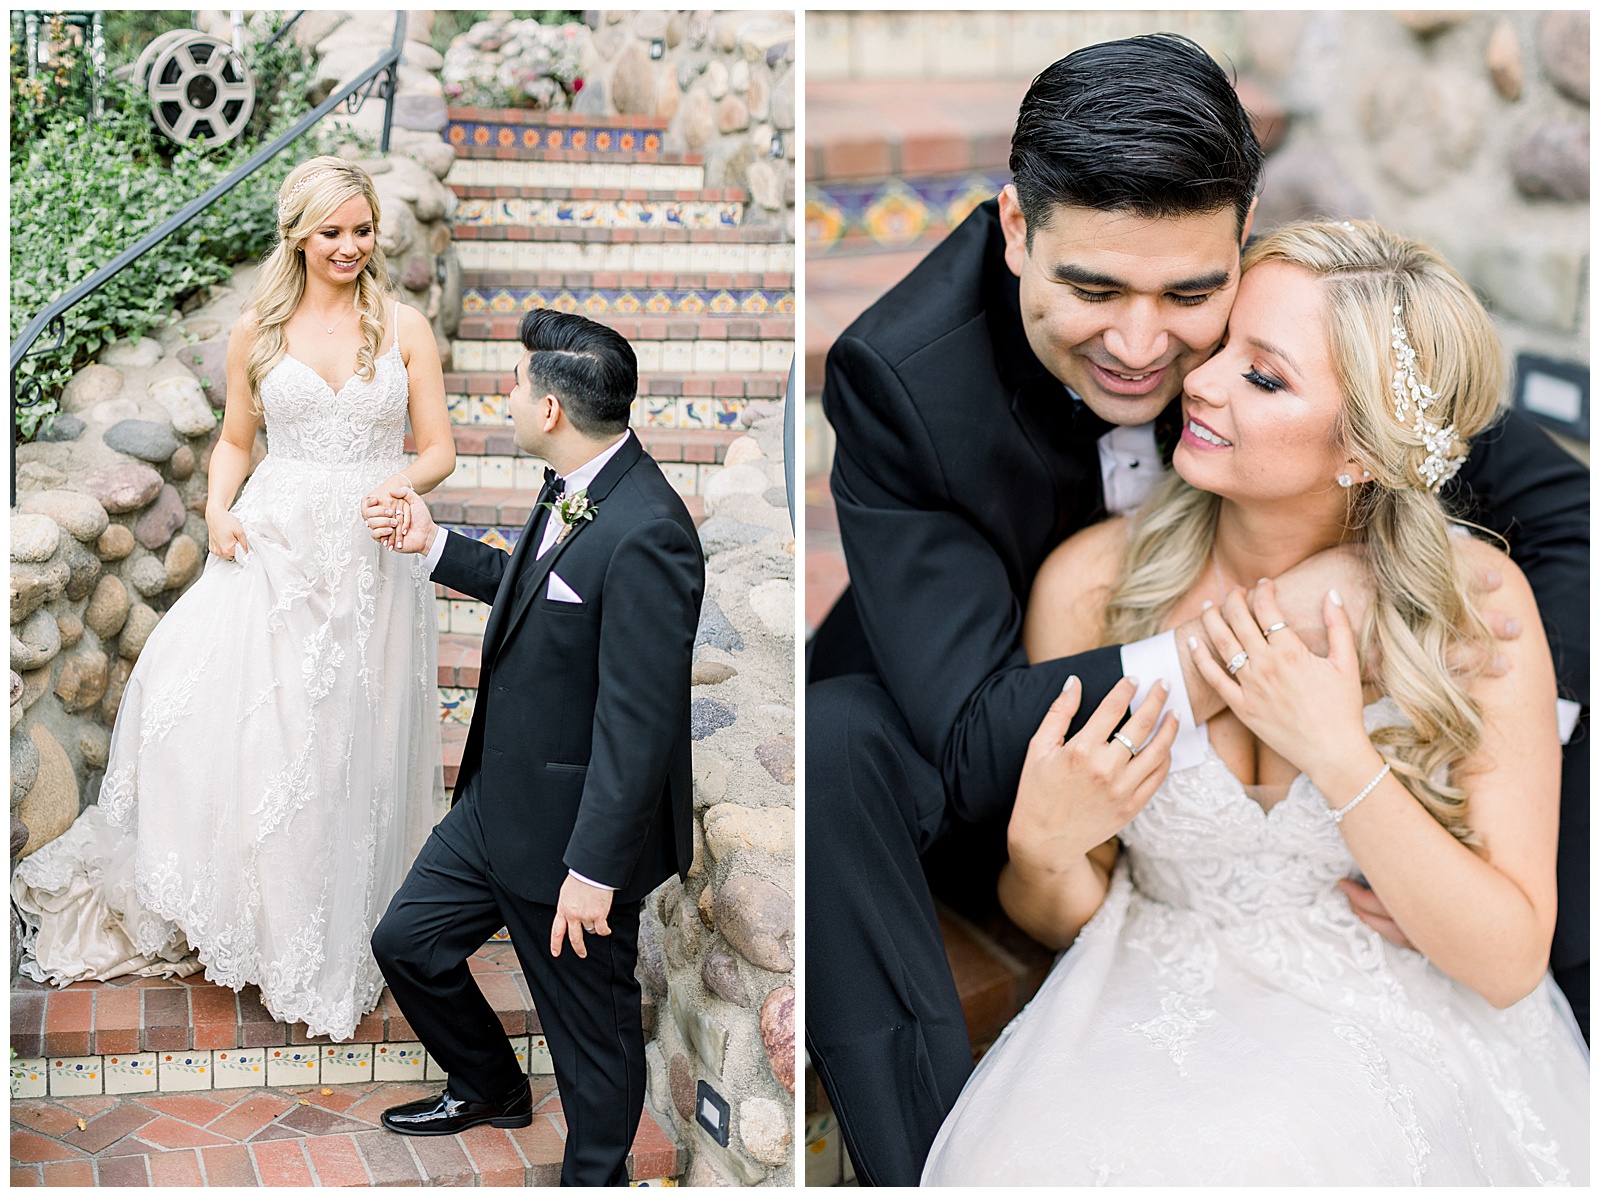 Bride and Groom Portraits on Stairs at Rancho Las Lomas